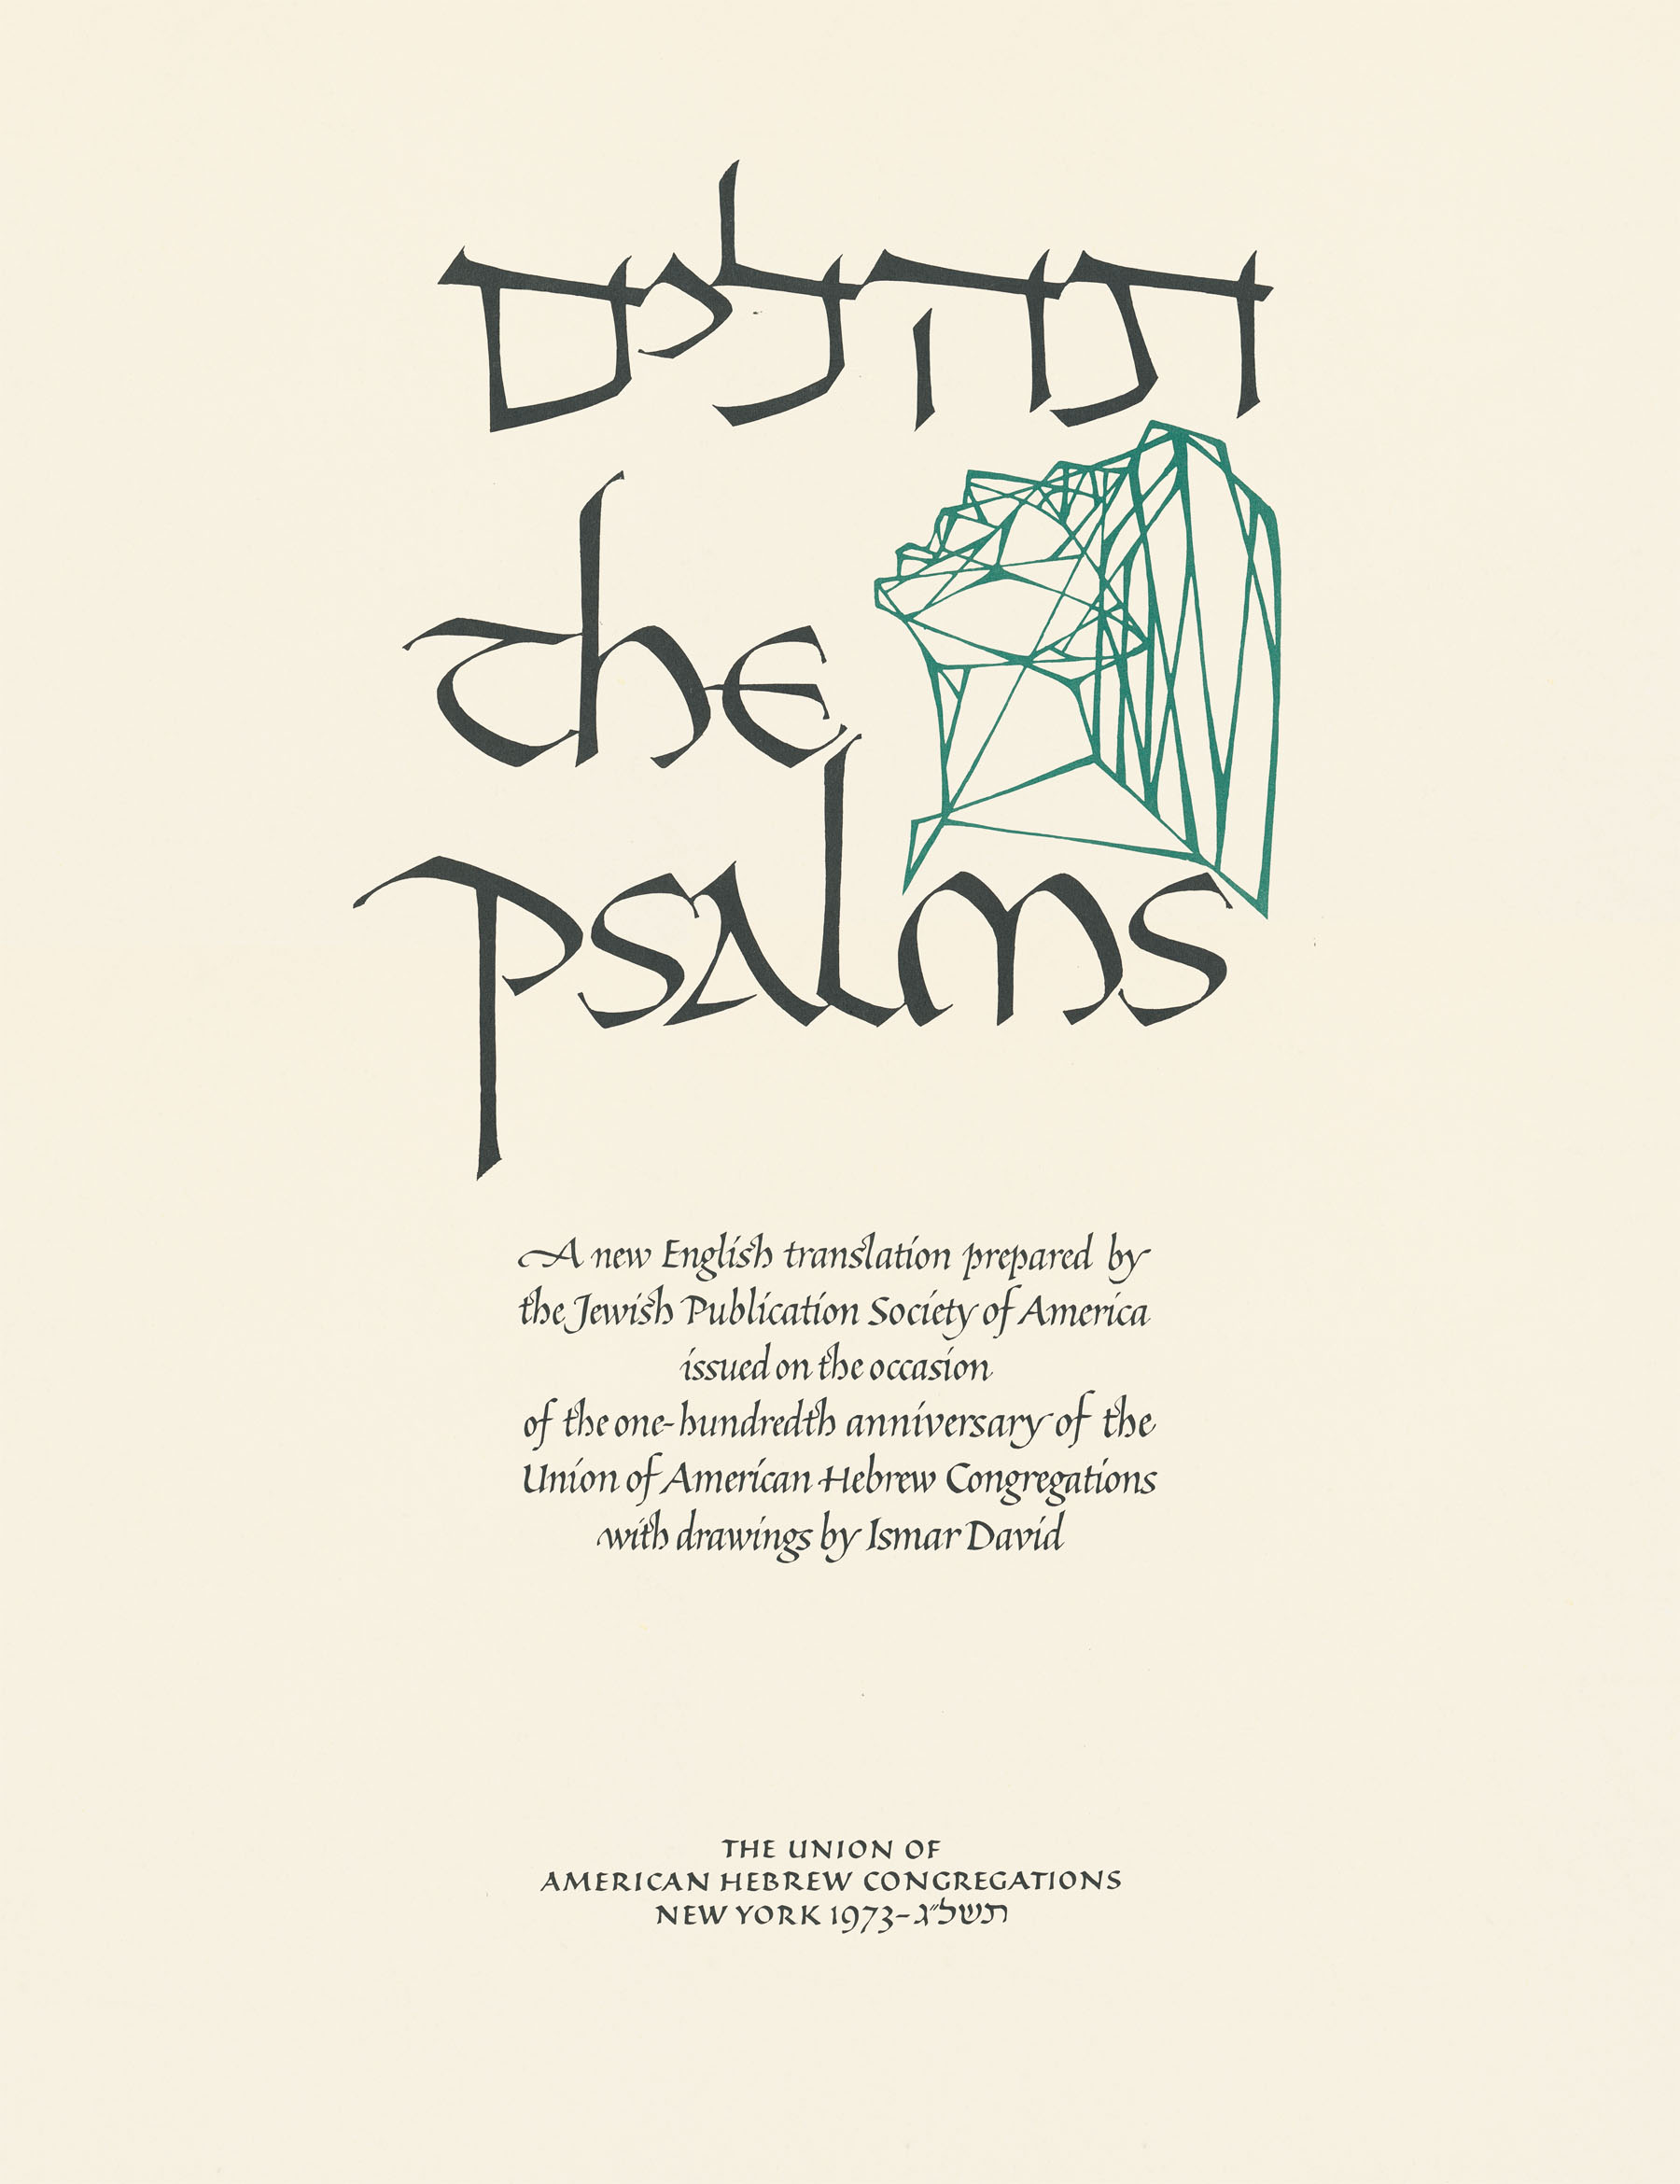 The Psalms title page